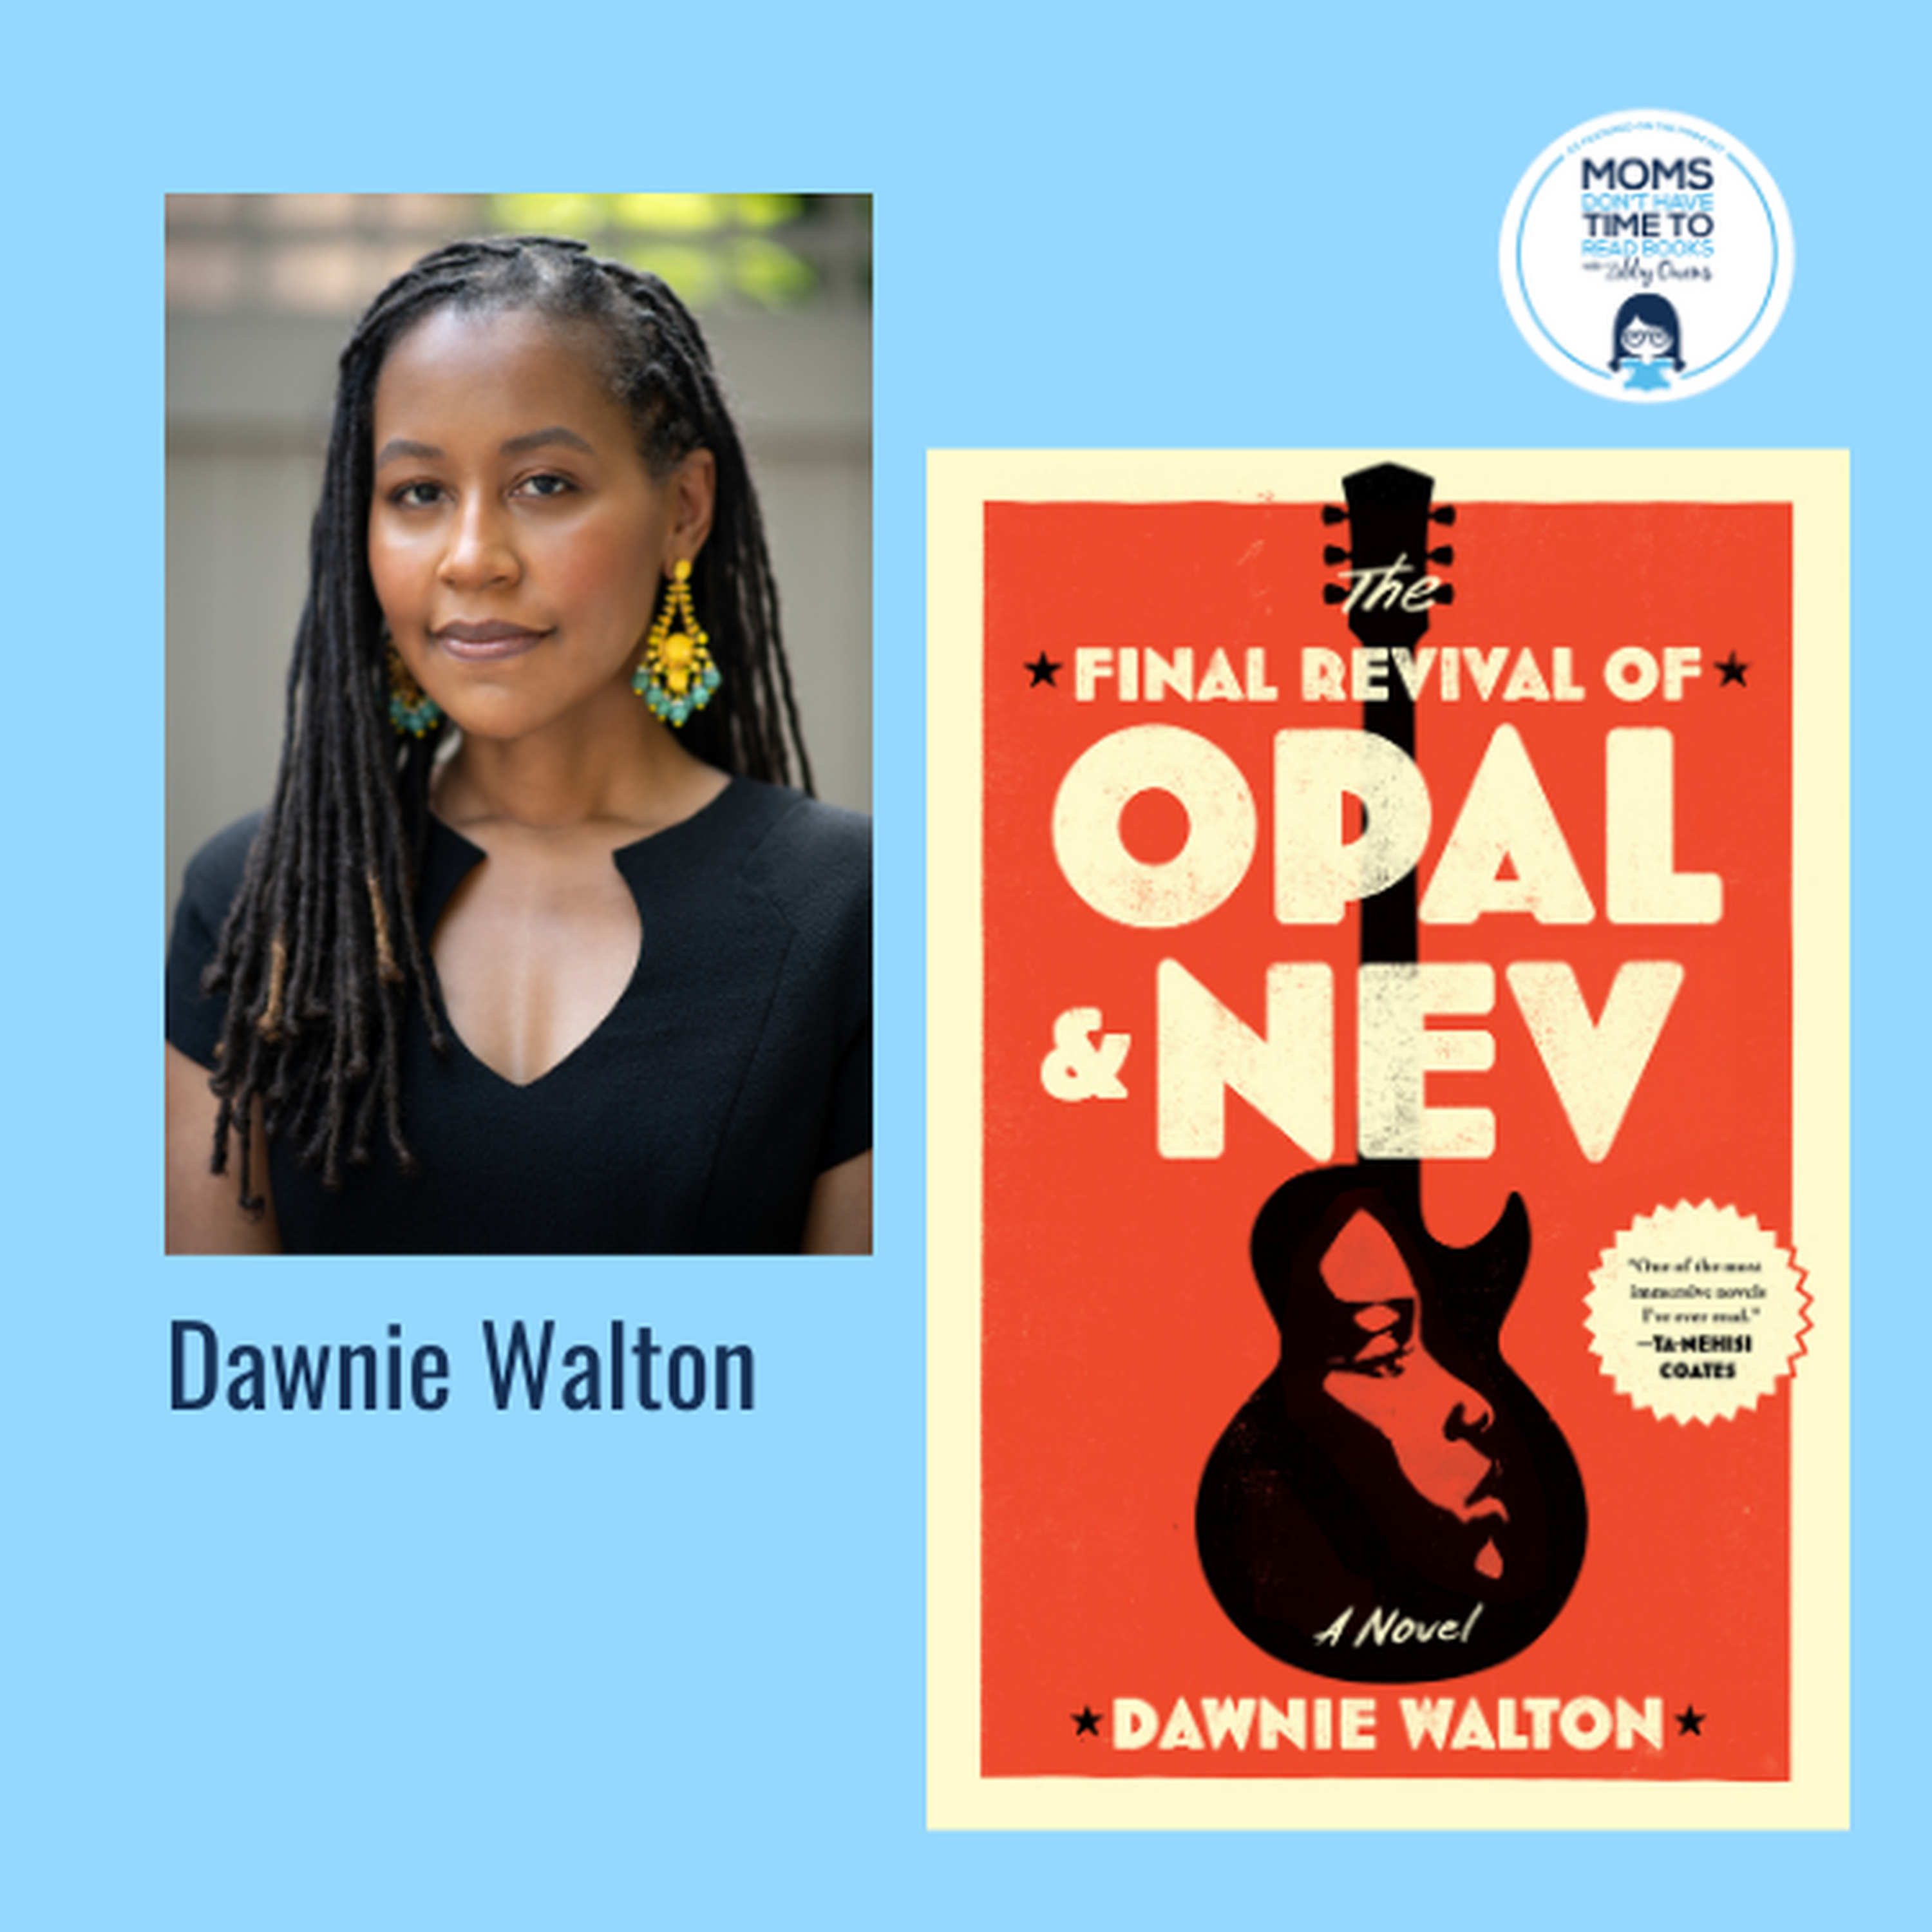 cover art for Dawnie Walton, THE FINAL REVIVAL OF OPAL & NEV